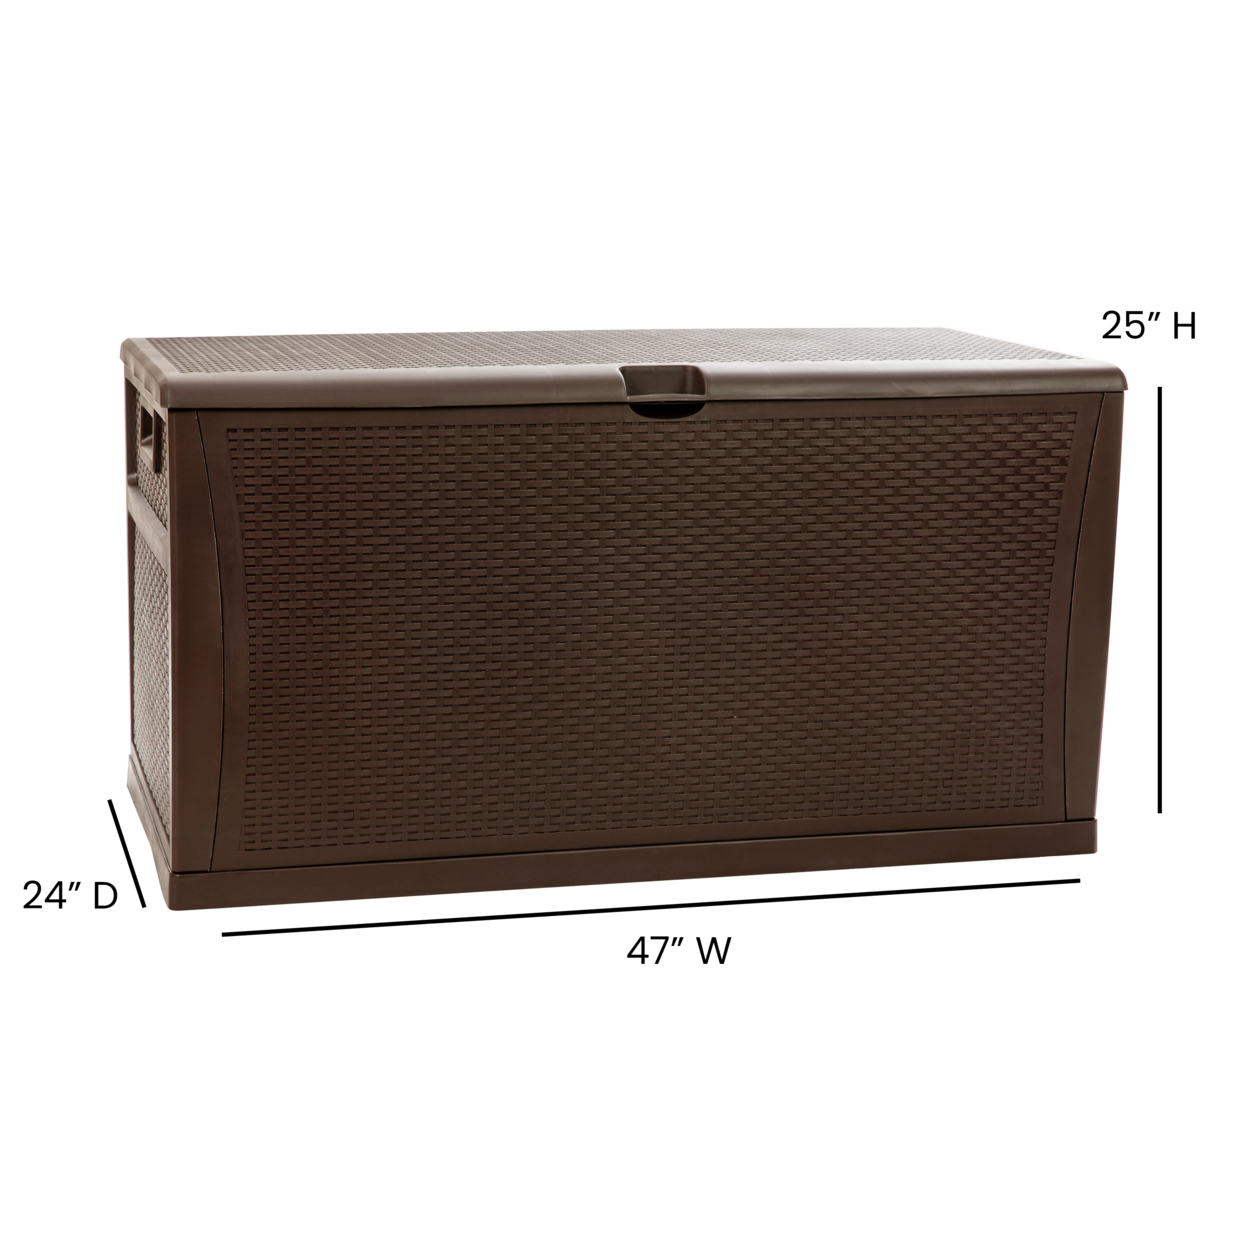 120 Gallon Plastic Deck Box - Outdoor Waterproof Storage Box For Patio Cushions, Garden Tools And Pool Toys, Brown